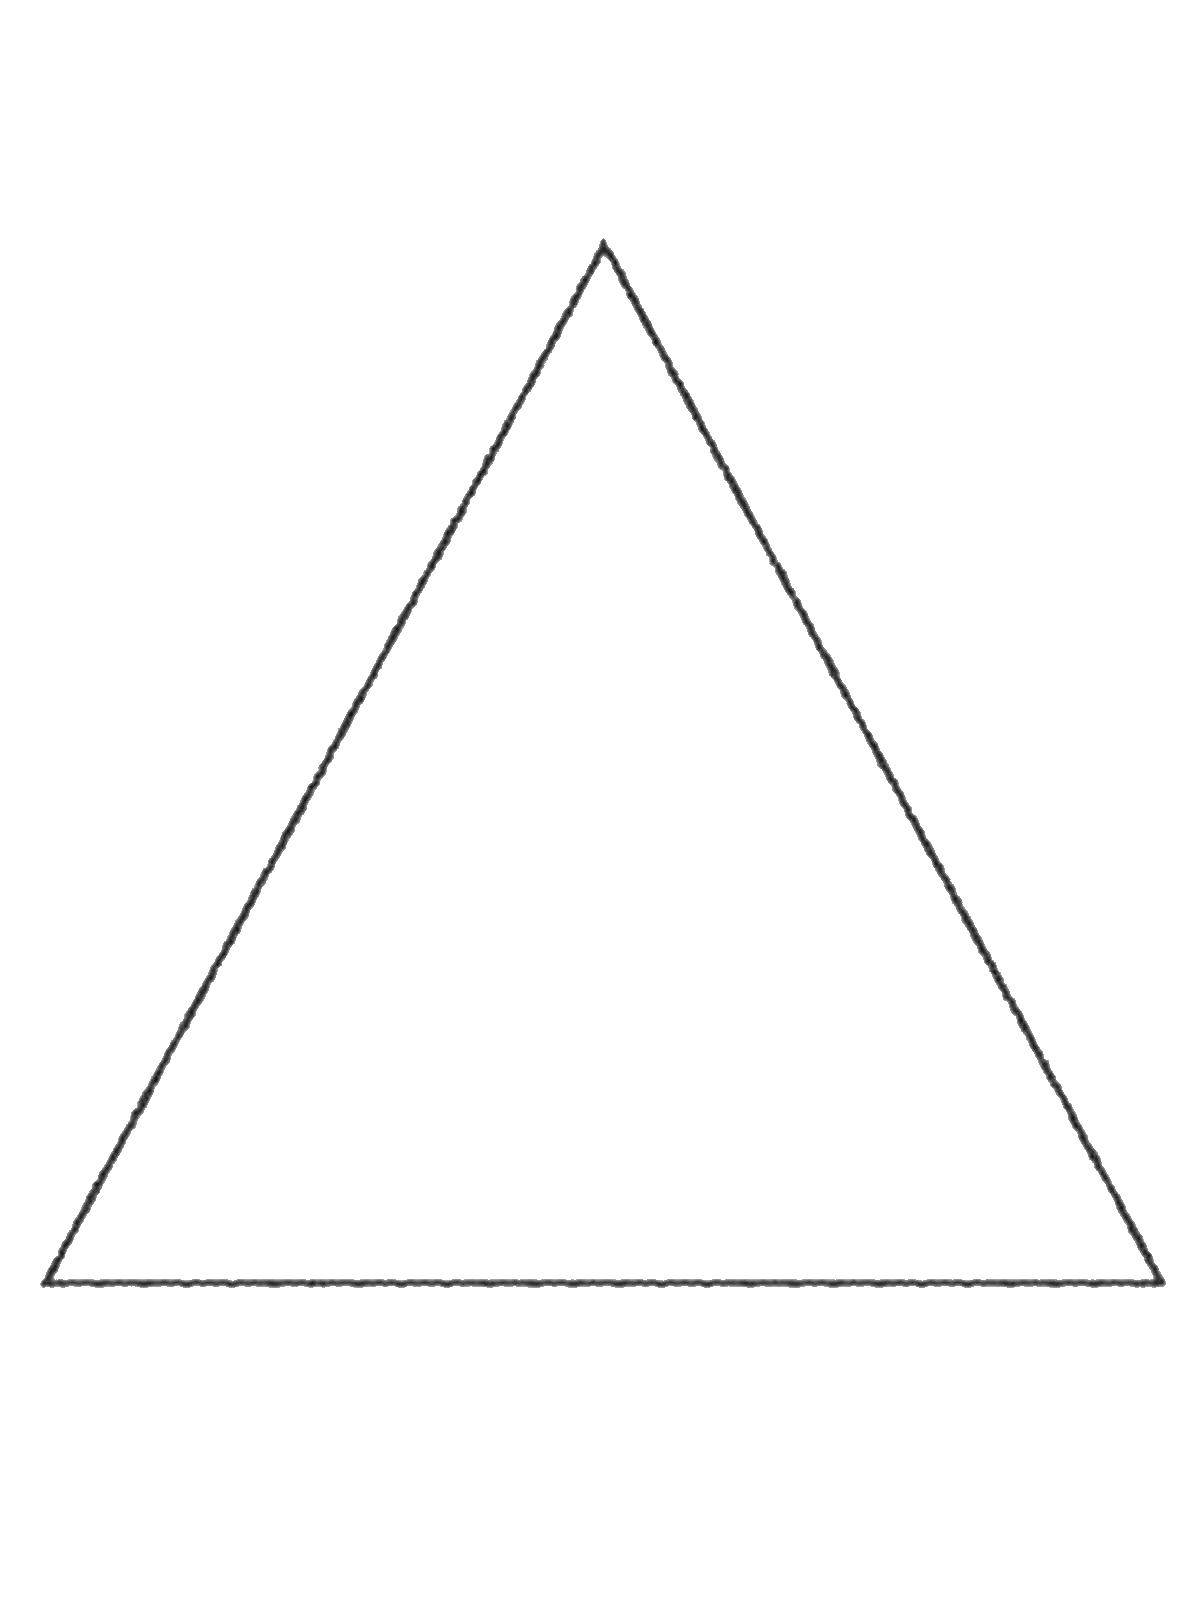 Coloring Triangle. Category coloring of the figures. Tags:  , triangle, .